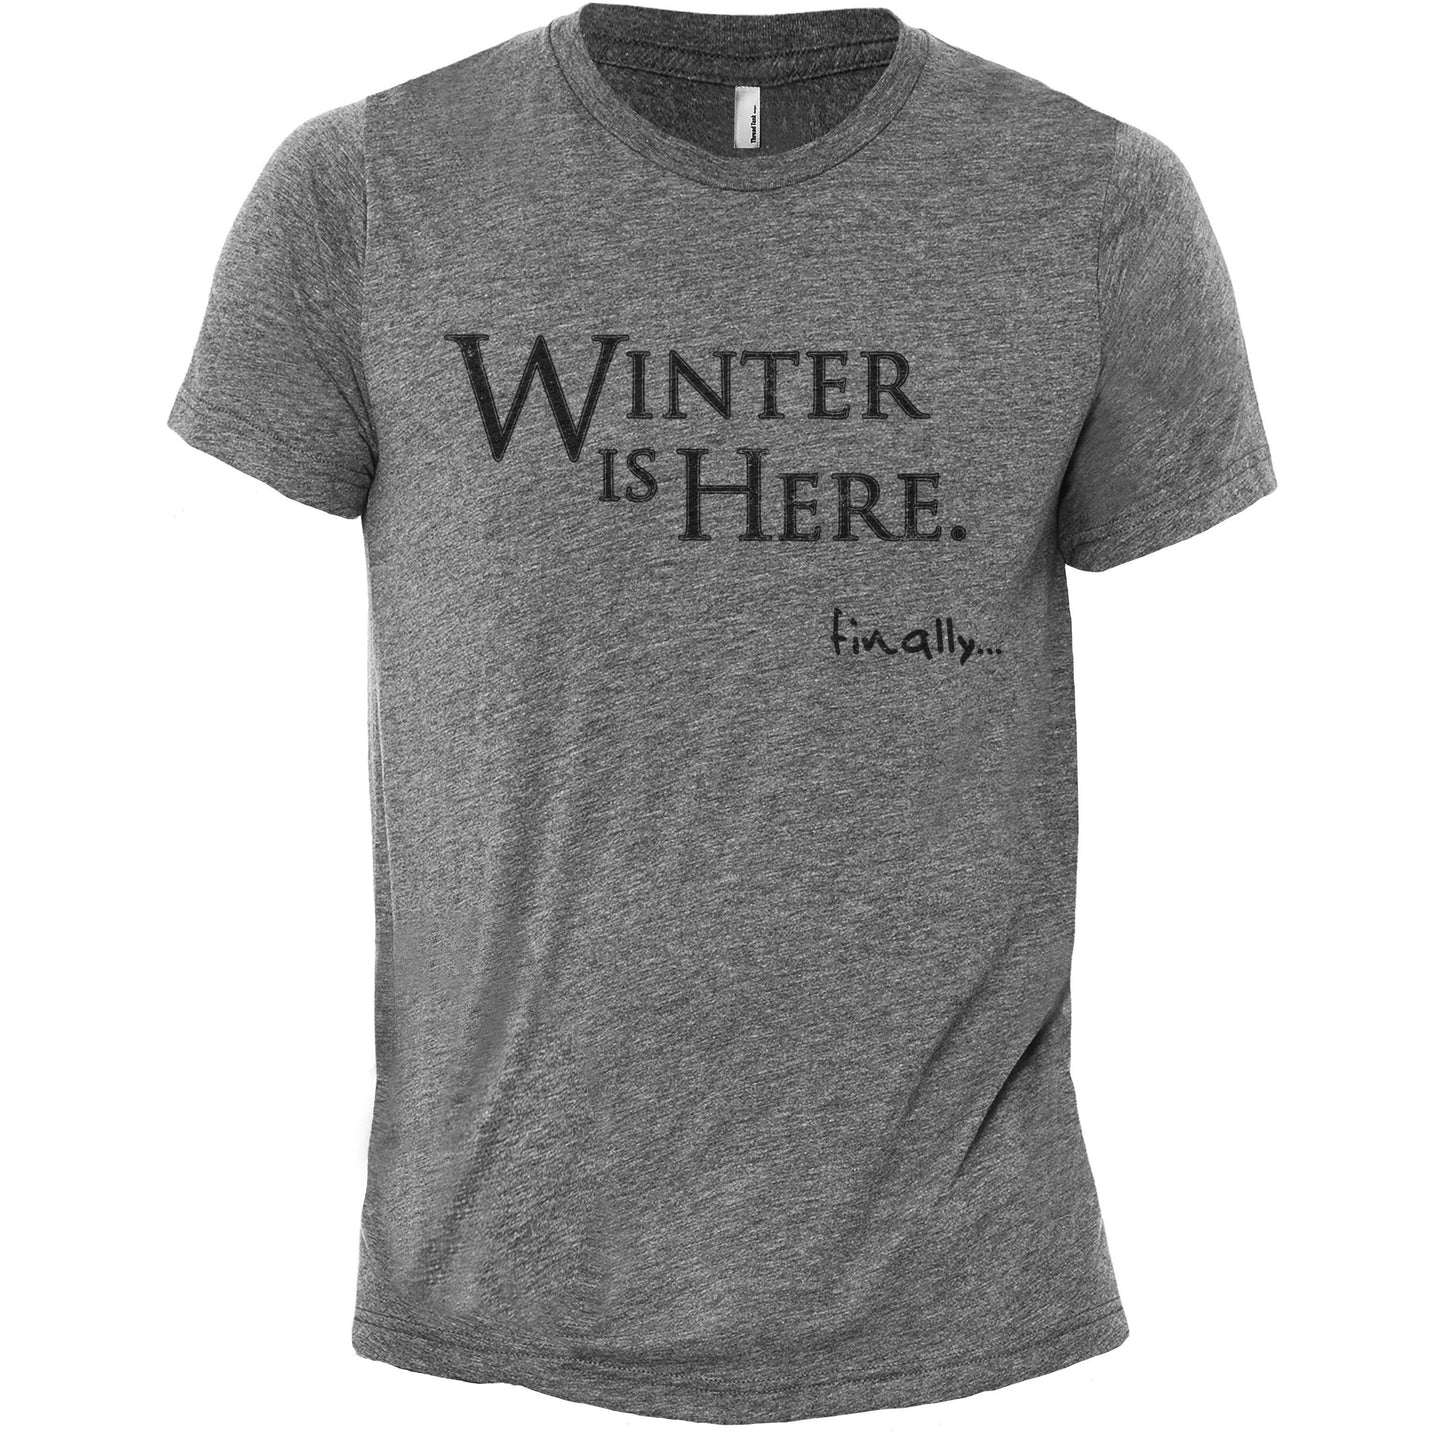 Winter Is Here Finally - Stories You Can Wear